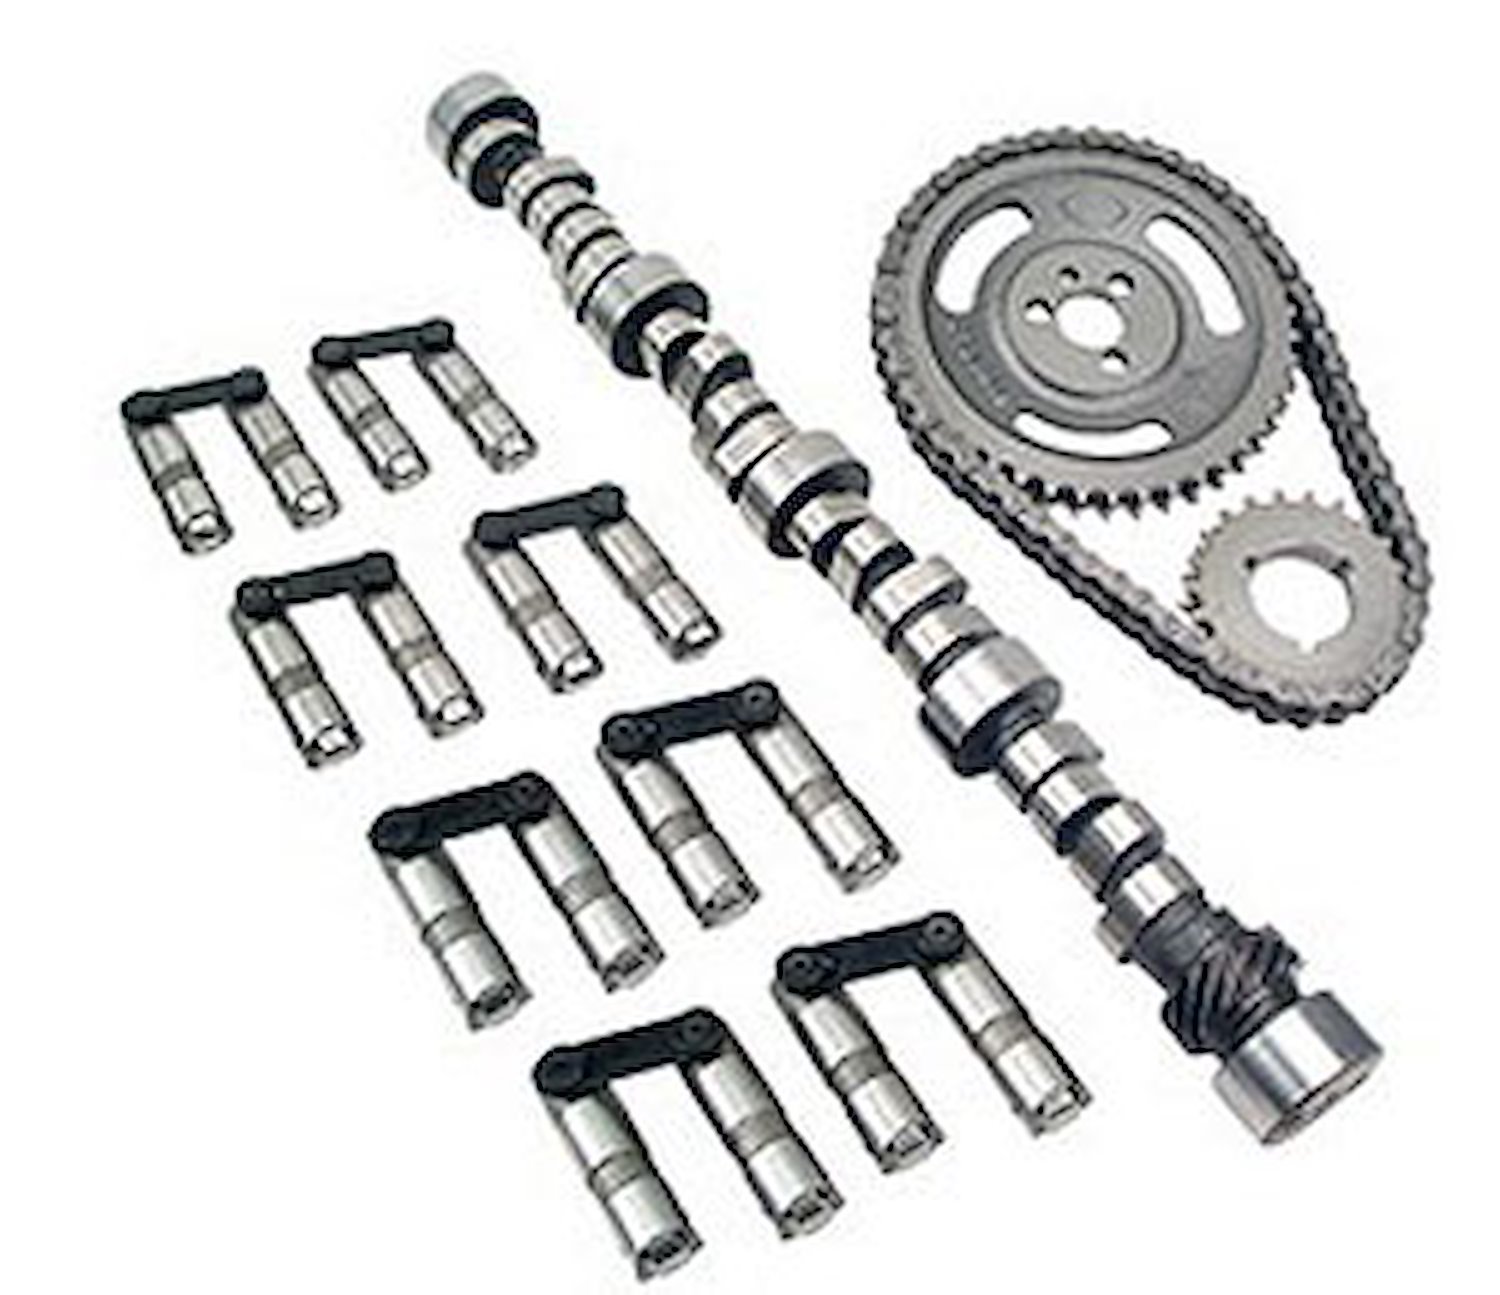 XFI Hydraulic Roller Camshaft Small Kit Small Block Chevy 305/350 1987-95 Lift: .570"/.565" With 1.6 Rockers